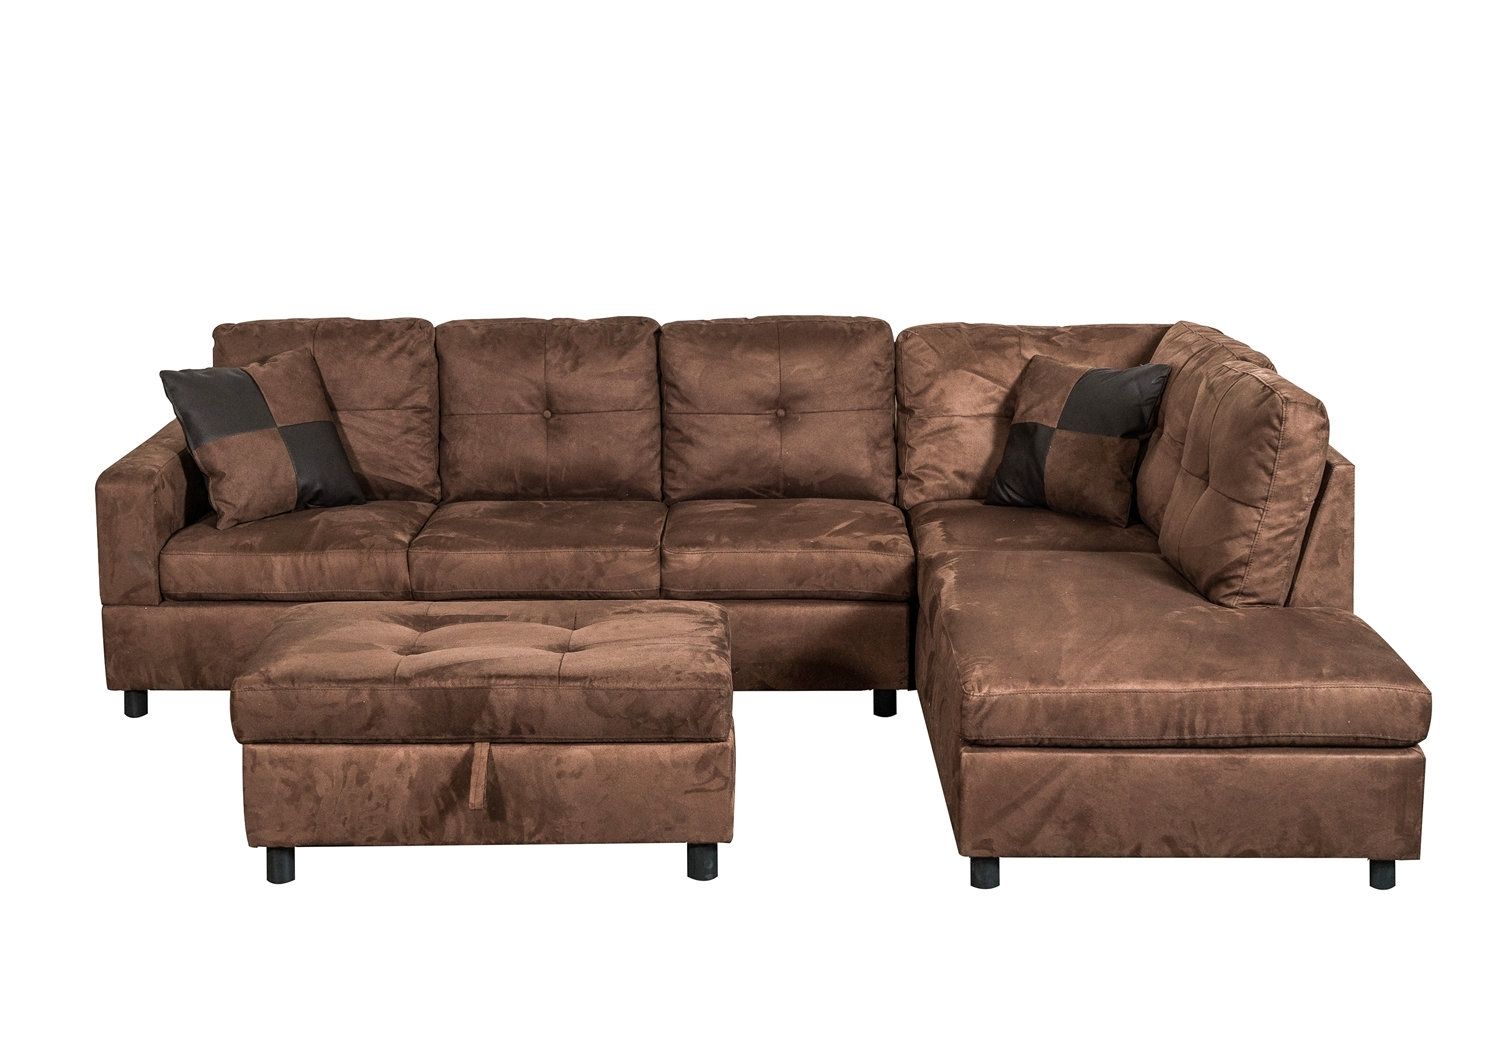 Charlton Home Richview Reversible Sectional Sofa With Ottoman | Wayfair For Collins Sofa Sectionals With Reversible Chaise (View 2 of 30)